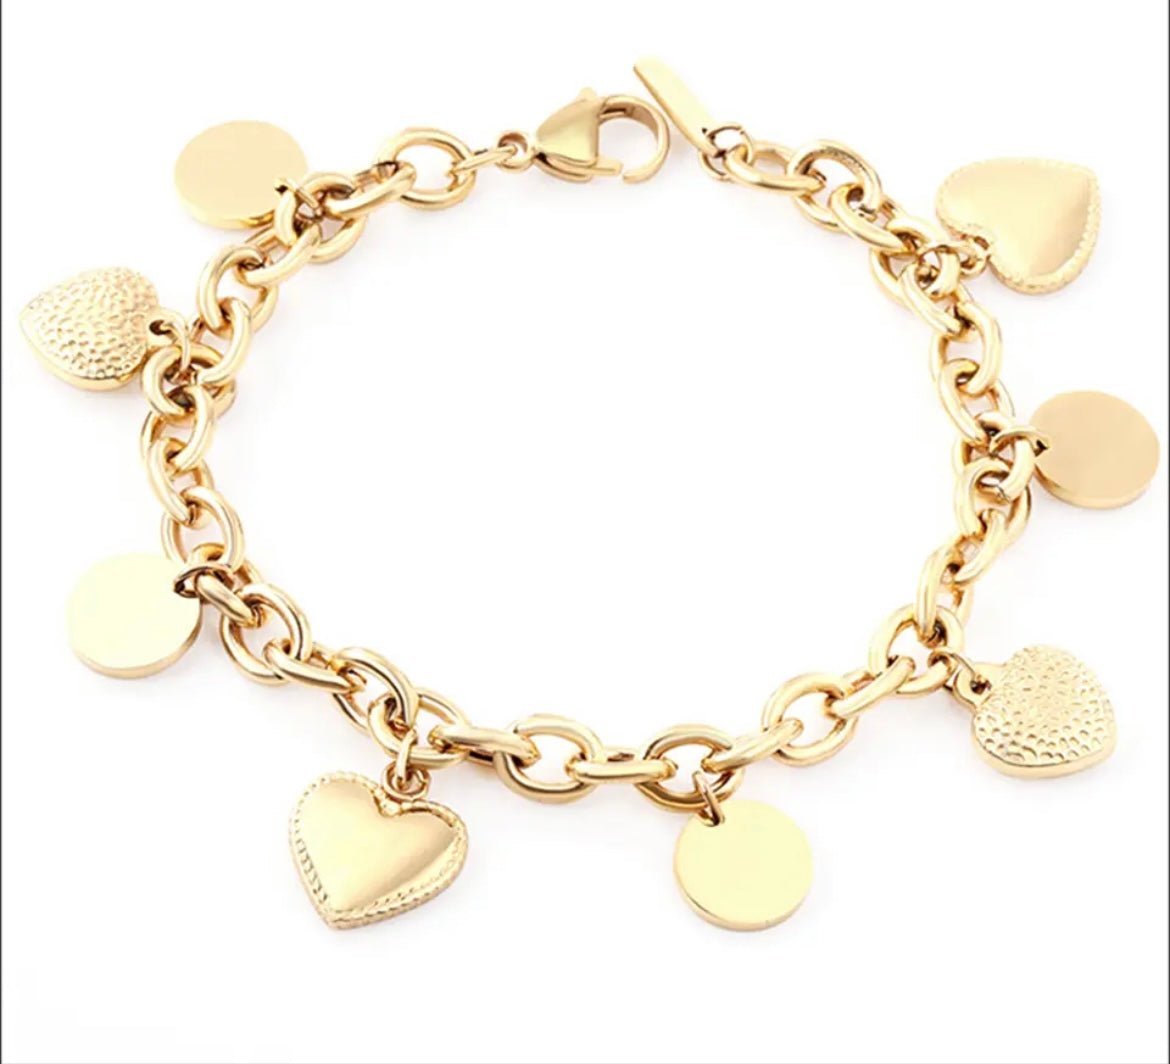 ♥︎HEART COIN ARMBAND - My Favourites